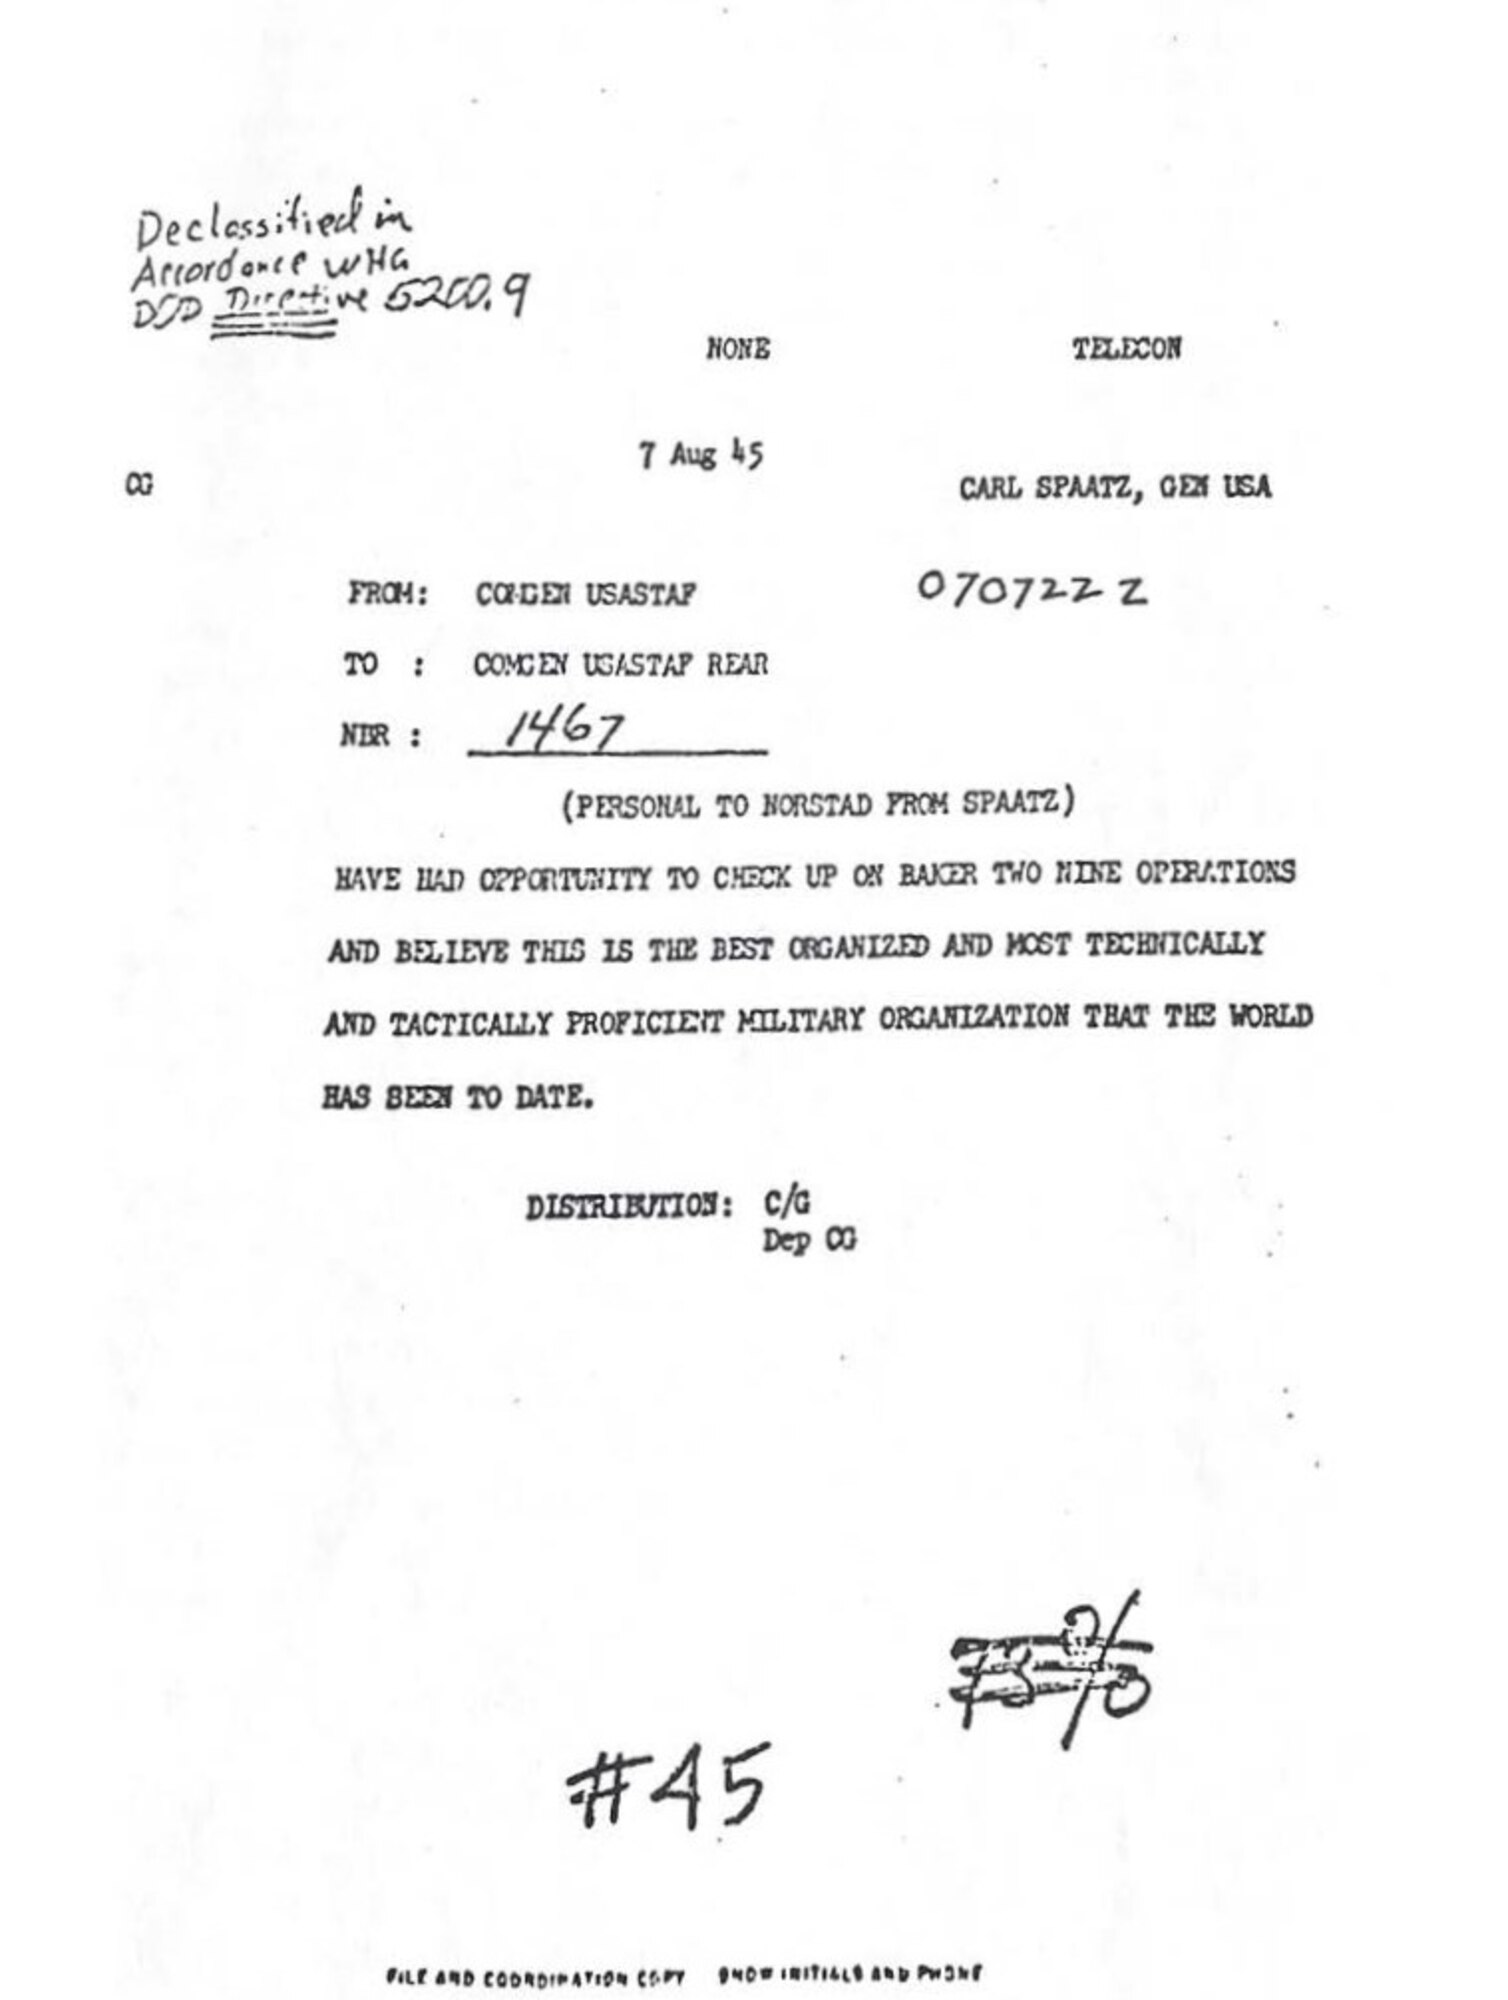 A declassified message from Gen. Carl Spaatz, Commander, US Army Strategic Air Forces, to Brig. Gen. Lauris Norstad, Twentieth Air Force Chief of Staff, dated 7 Aug 1945. Following up on his inspection of “Baker Two Nine (B-29) operations” in the Pacific Theater, Gen. Spaatz relayed his impression that the Twentieth Air Force was “the best organized and most technically and tactically proficient military organization that the world has seen to date.” (Courtesy photo)